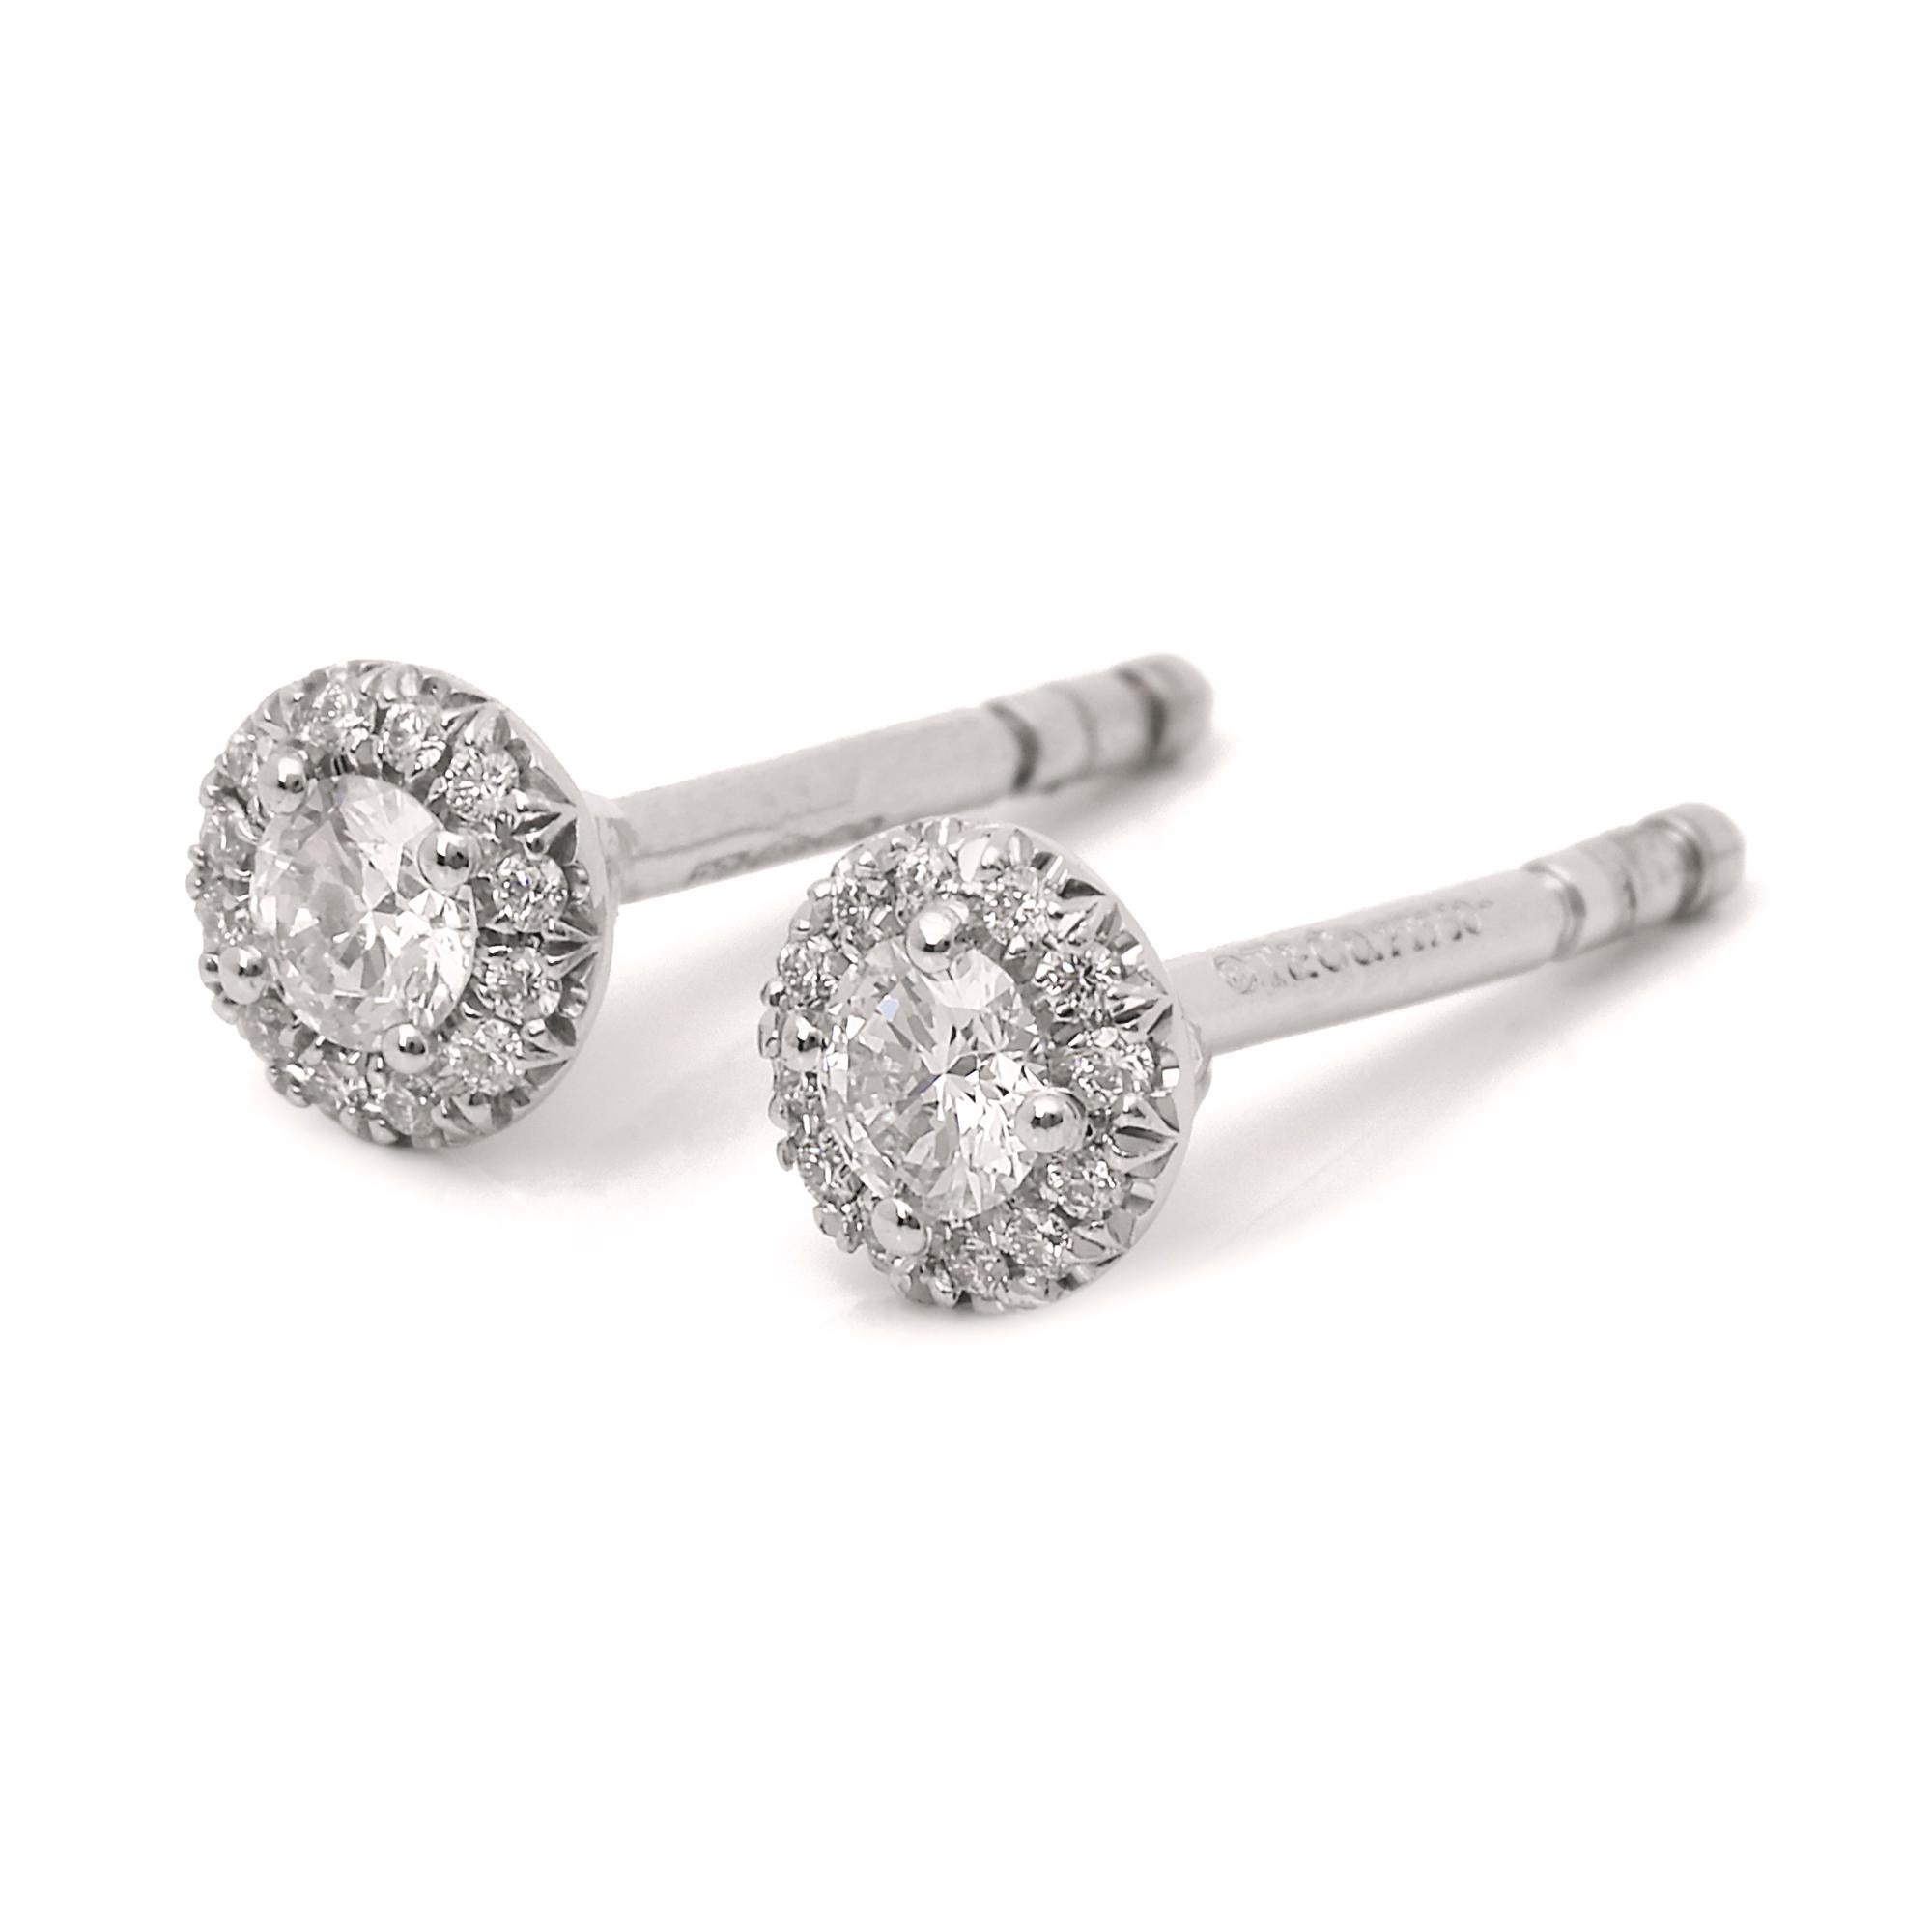 These earrings by Tiffany & Co are from the Soleste collection featuring a total of 0.17ct of round brilliant cut diamonds made in Platinum. Accompanied with their Tiffany box and gift receipt. Our Xupes reference code is J568 should you need to